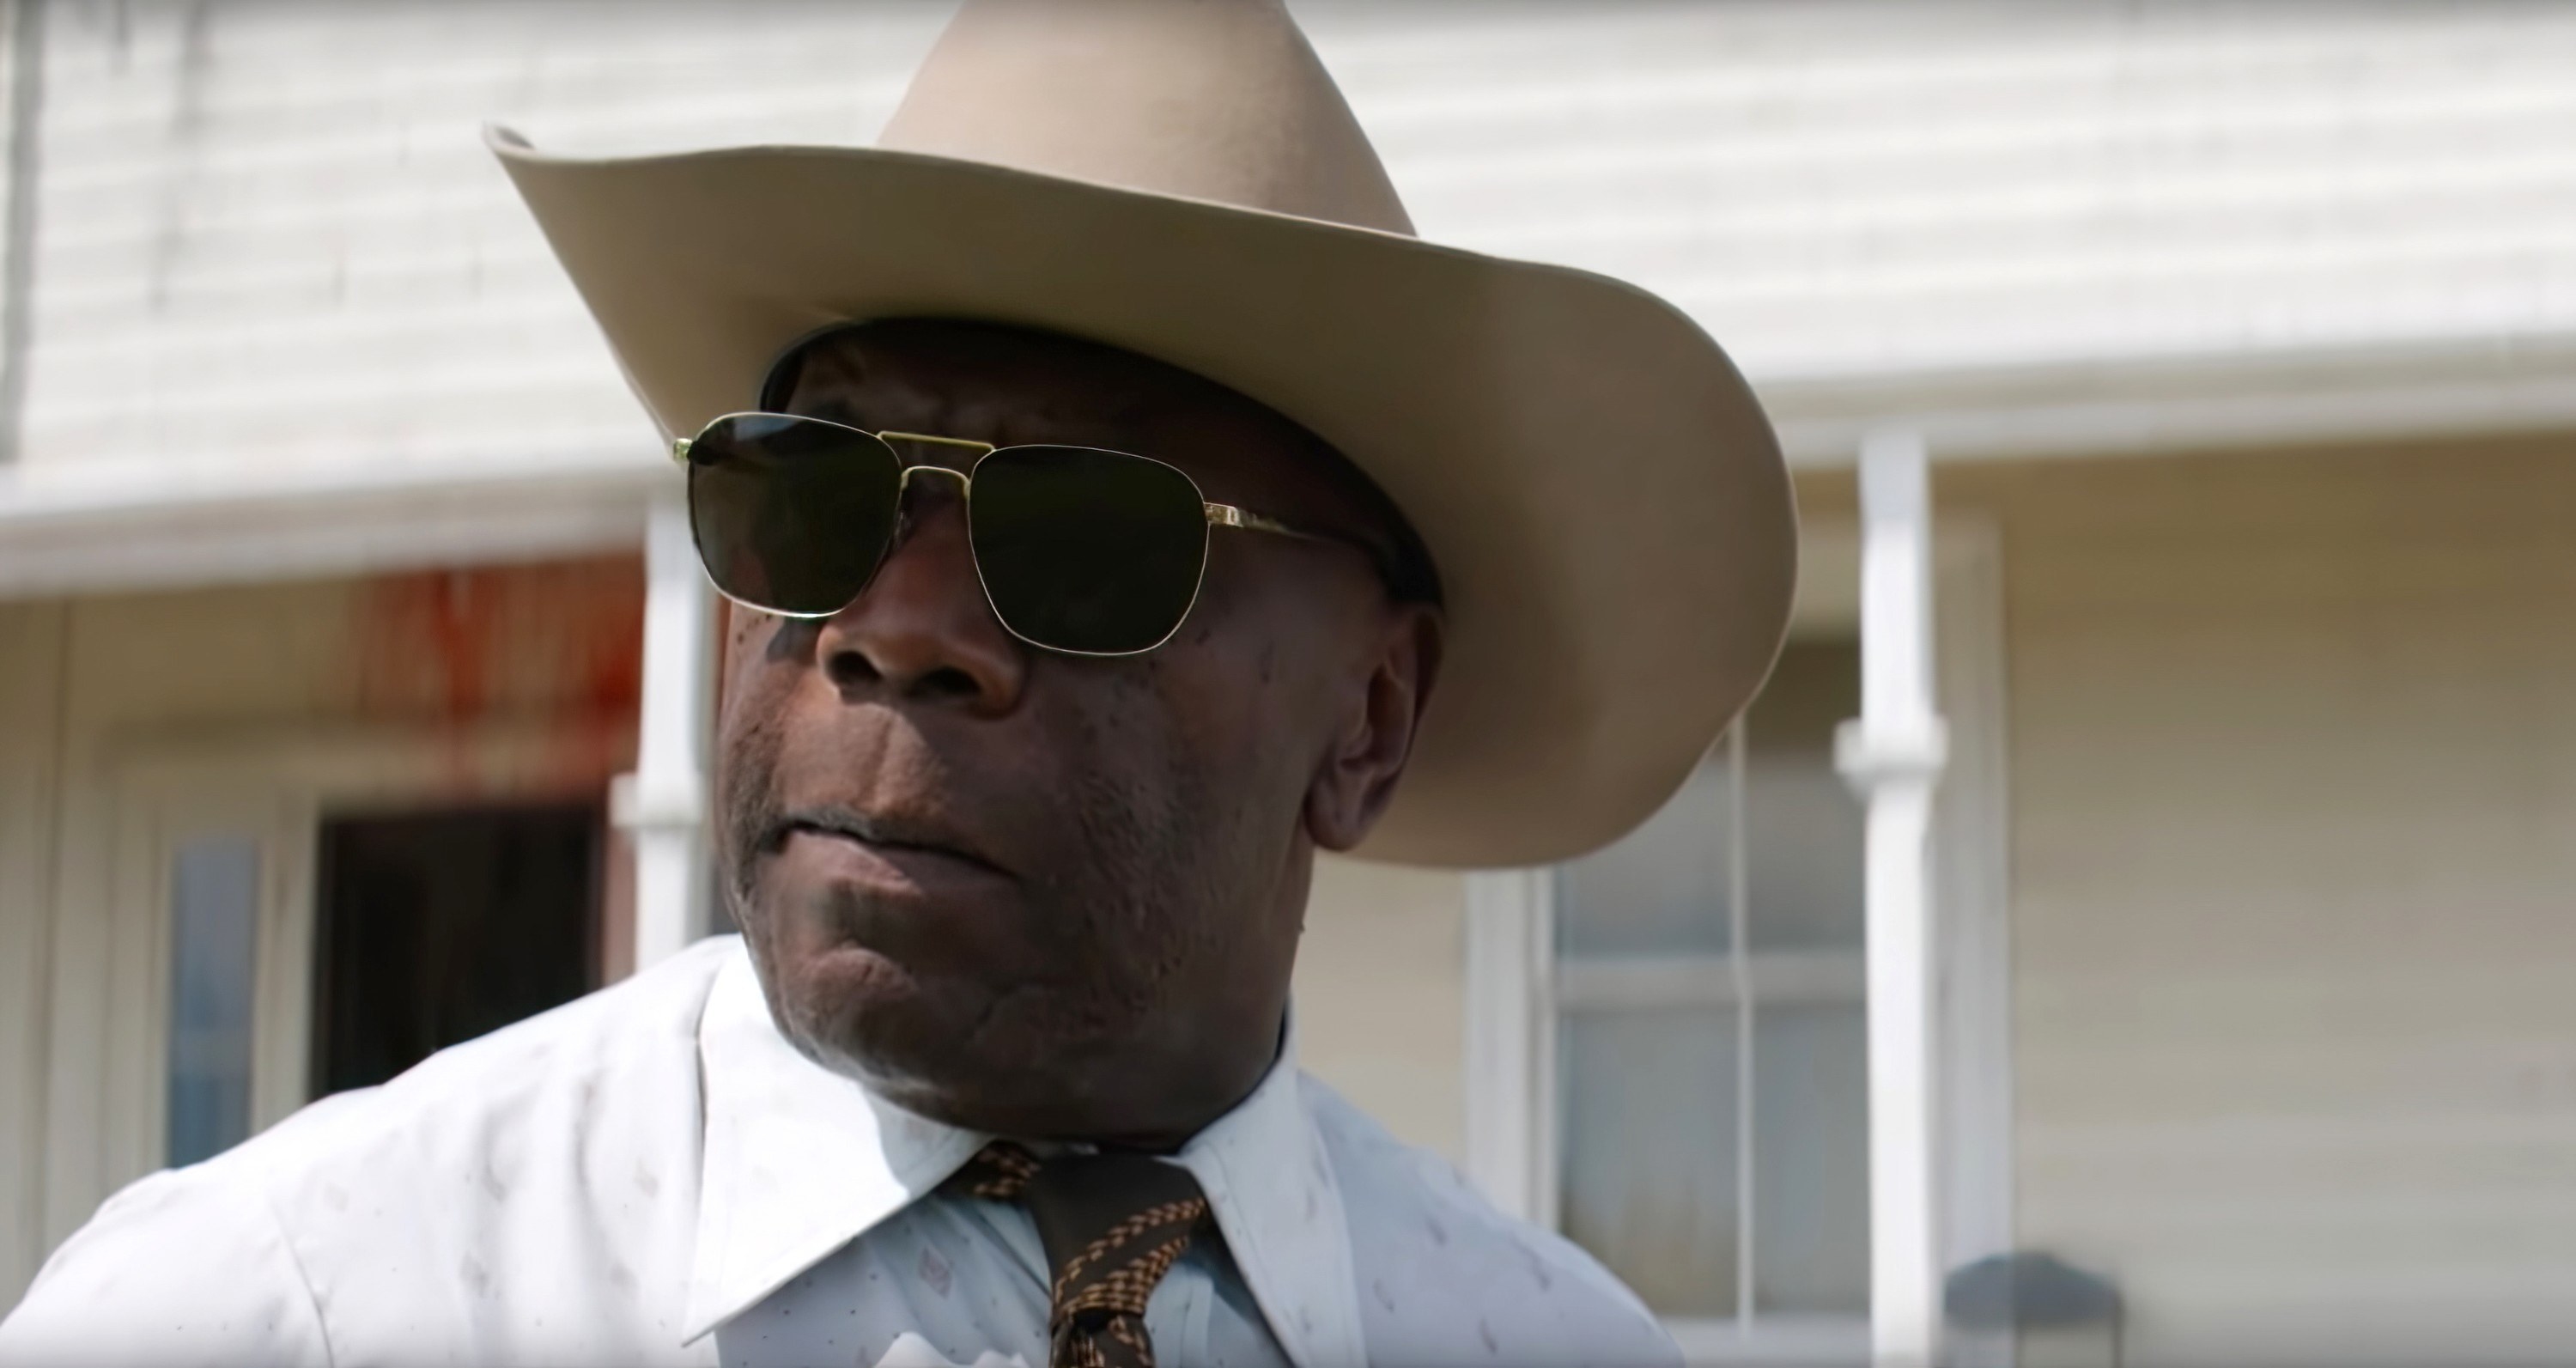 James Gaylyn as the sheriff, wearing a cowboy hat and sunglasses